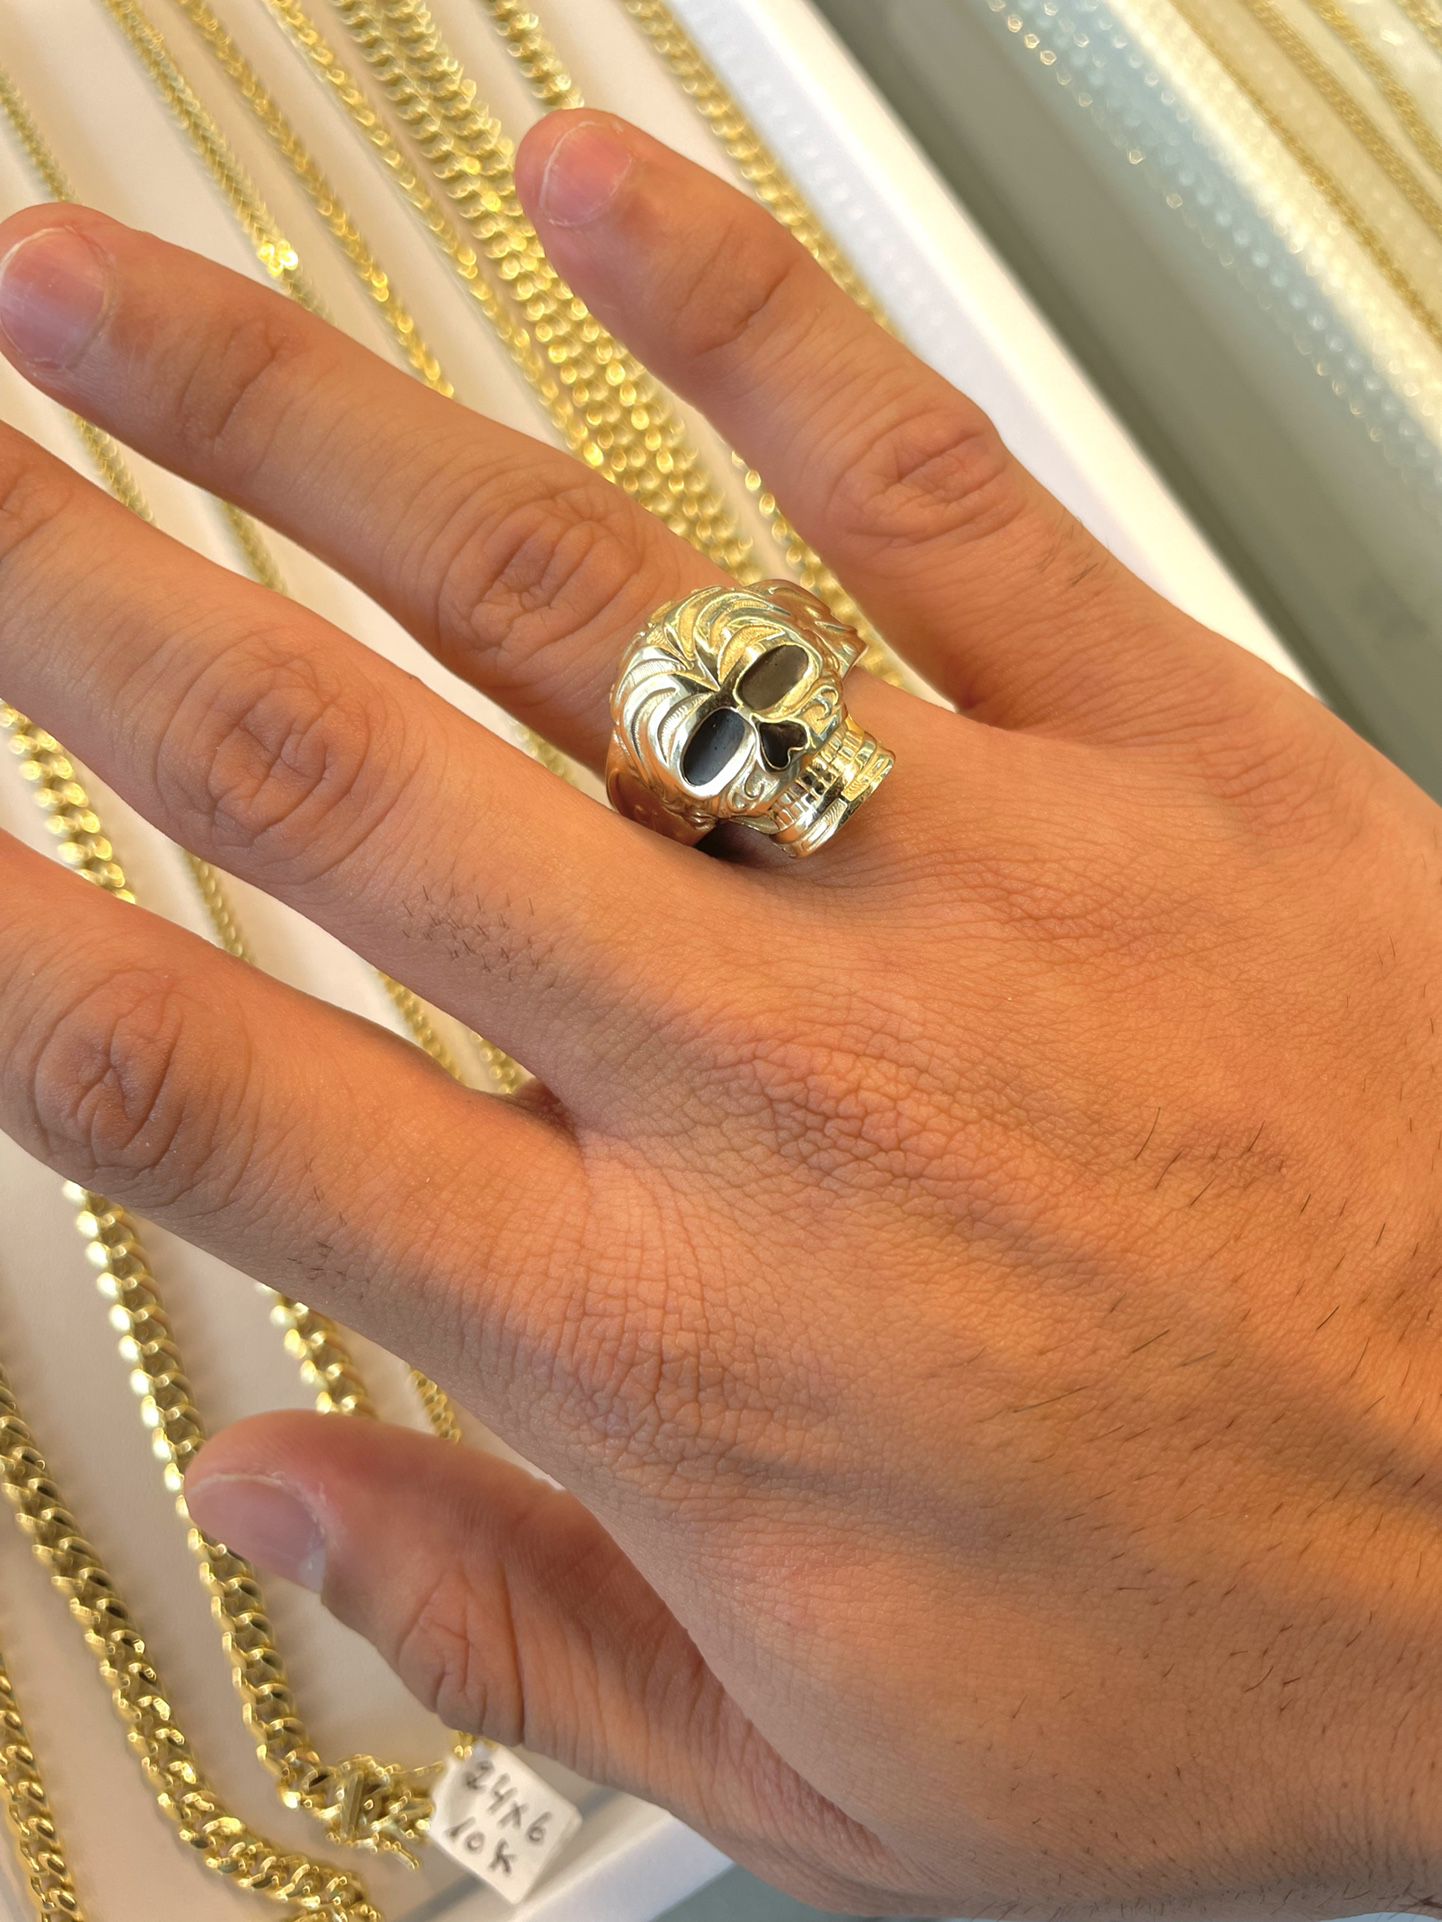 10K Gold Skull Ring. We Work With Size Adjustments. Can Finance Without Credit For $70.  We’re A Jewelry Store